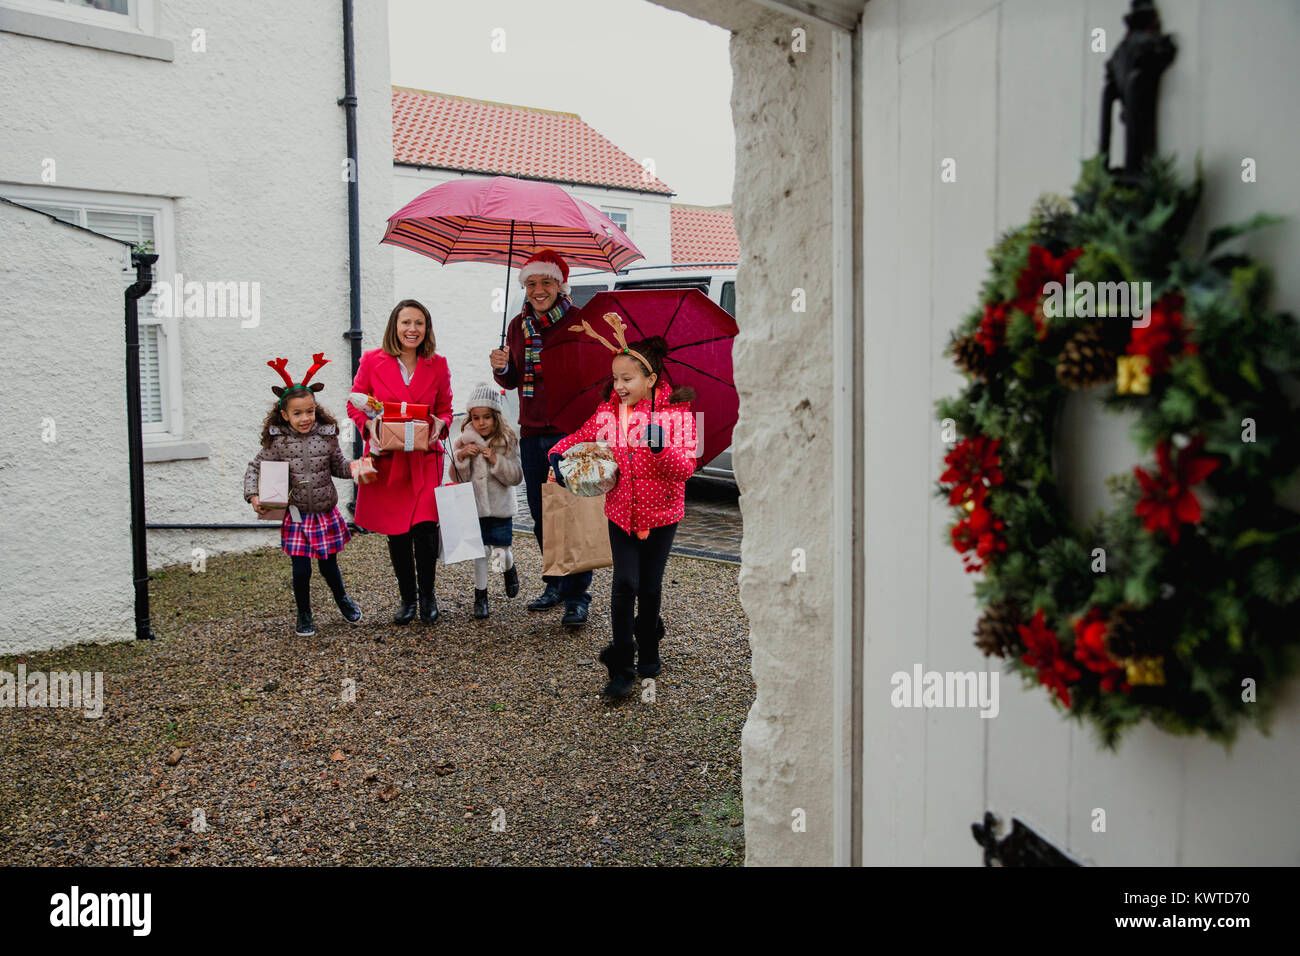 Cheerful family are walking to grandmas house for christmas. They are wearning christmas decorations and carrying presents and gifts. Stock Photo